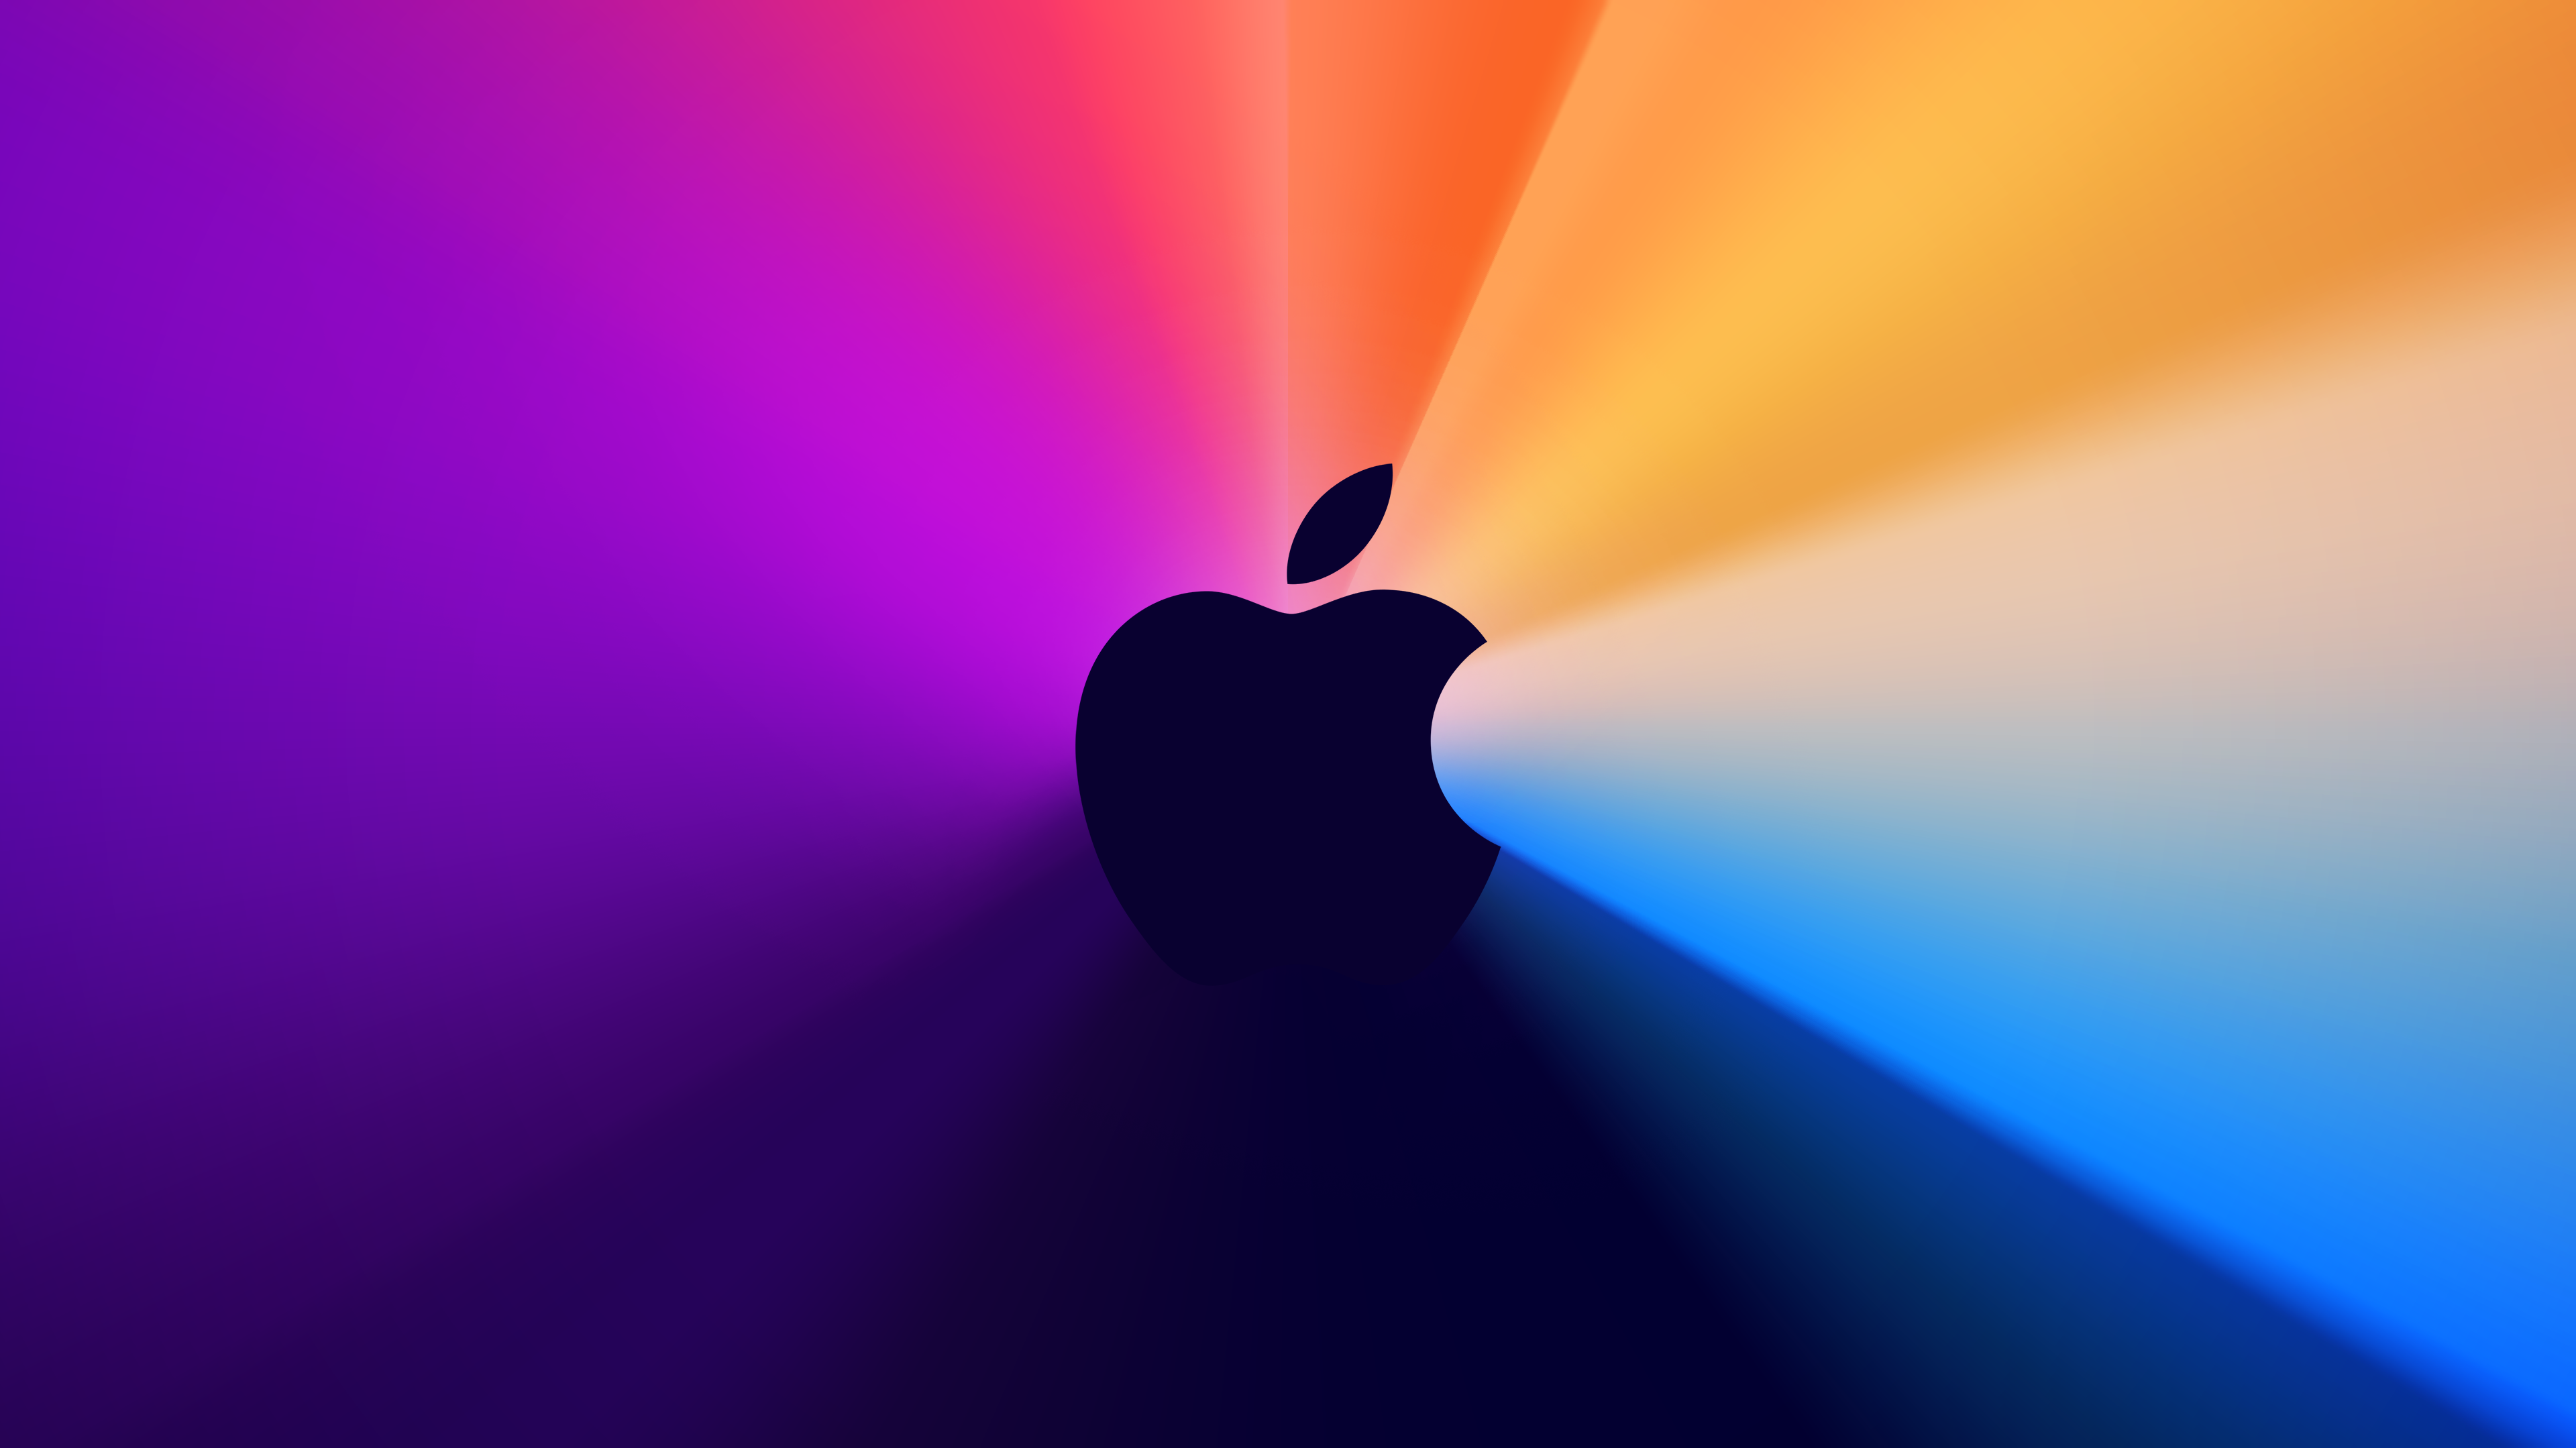 I Recreated Apple S One More Thing Promotional Image As A 4k